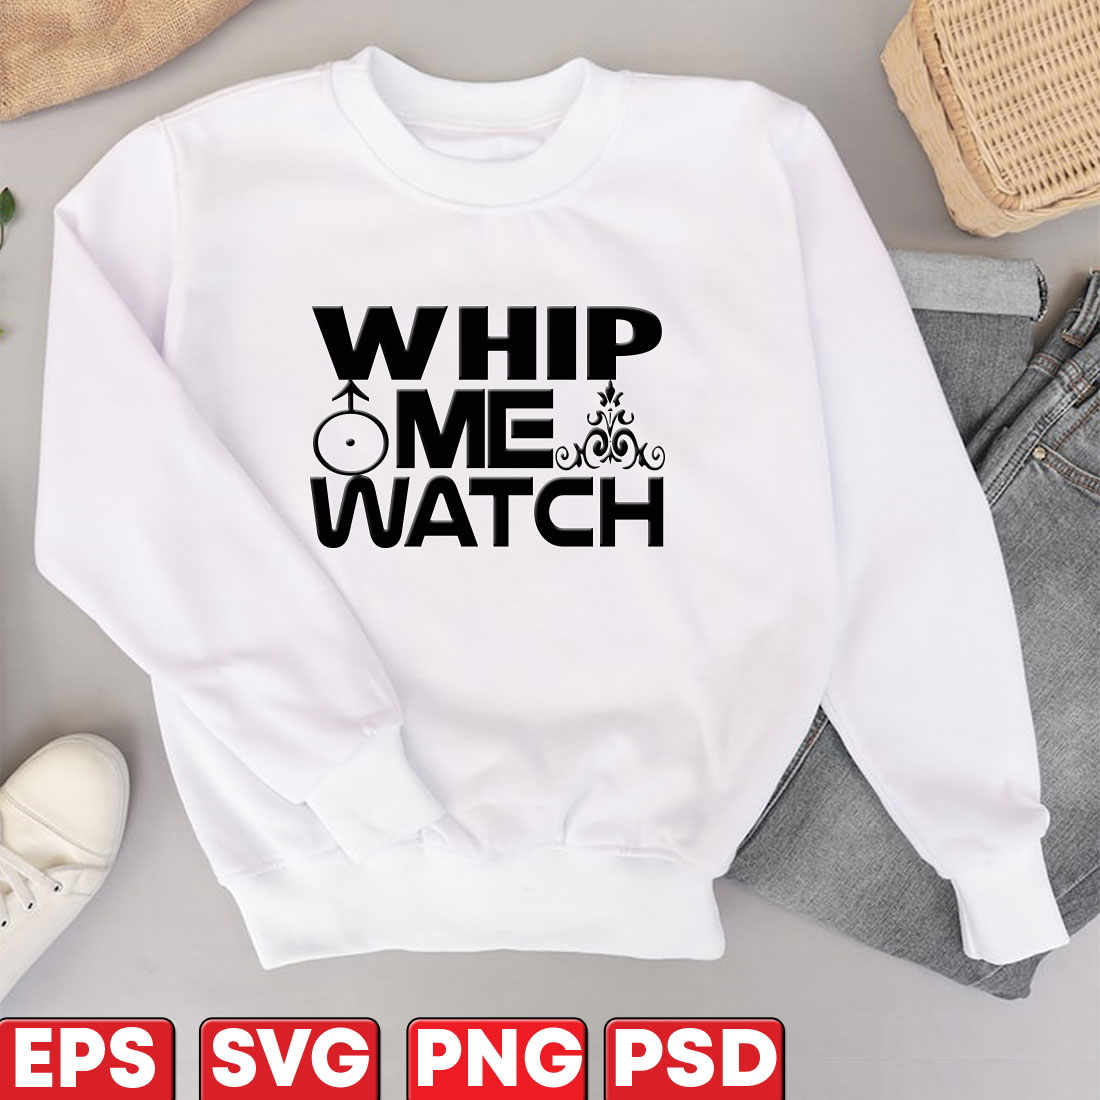 Whip Me Watch cover image.